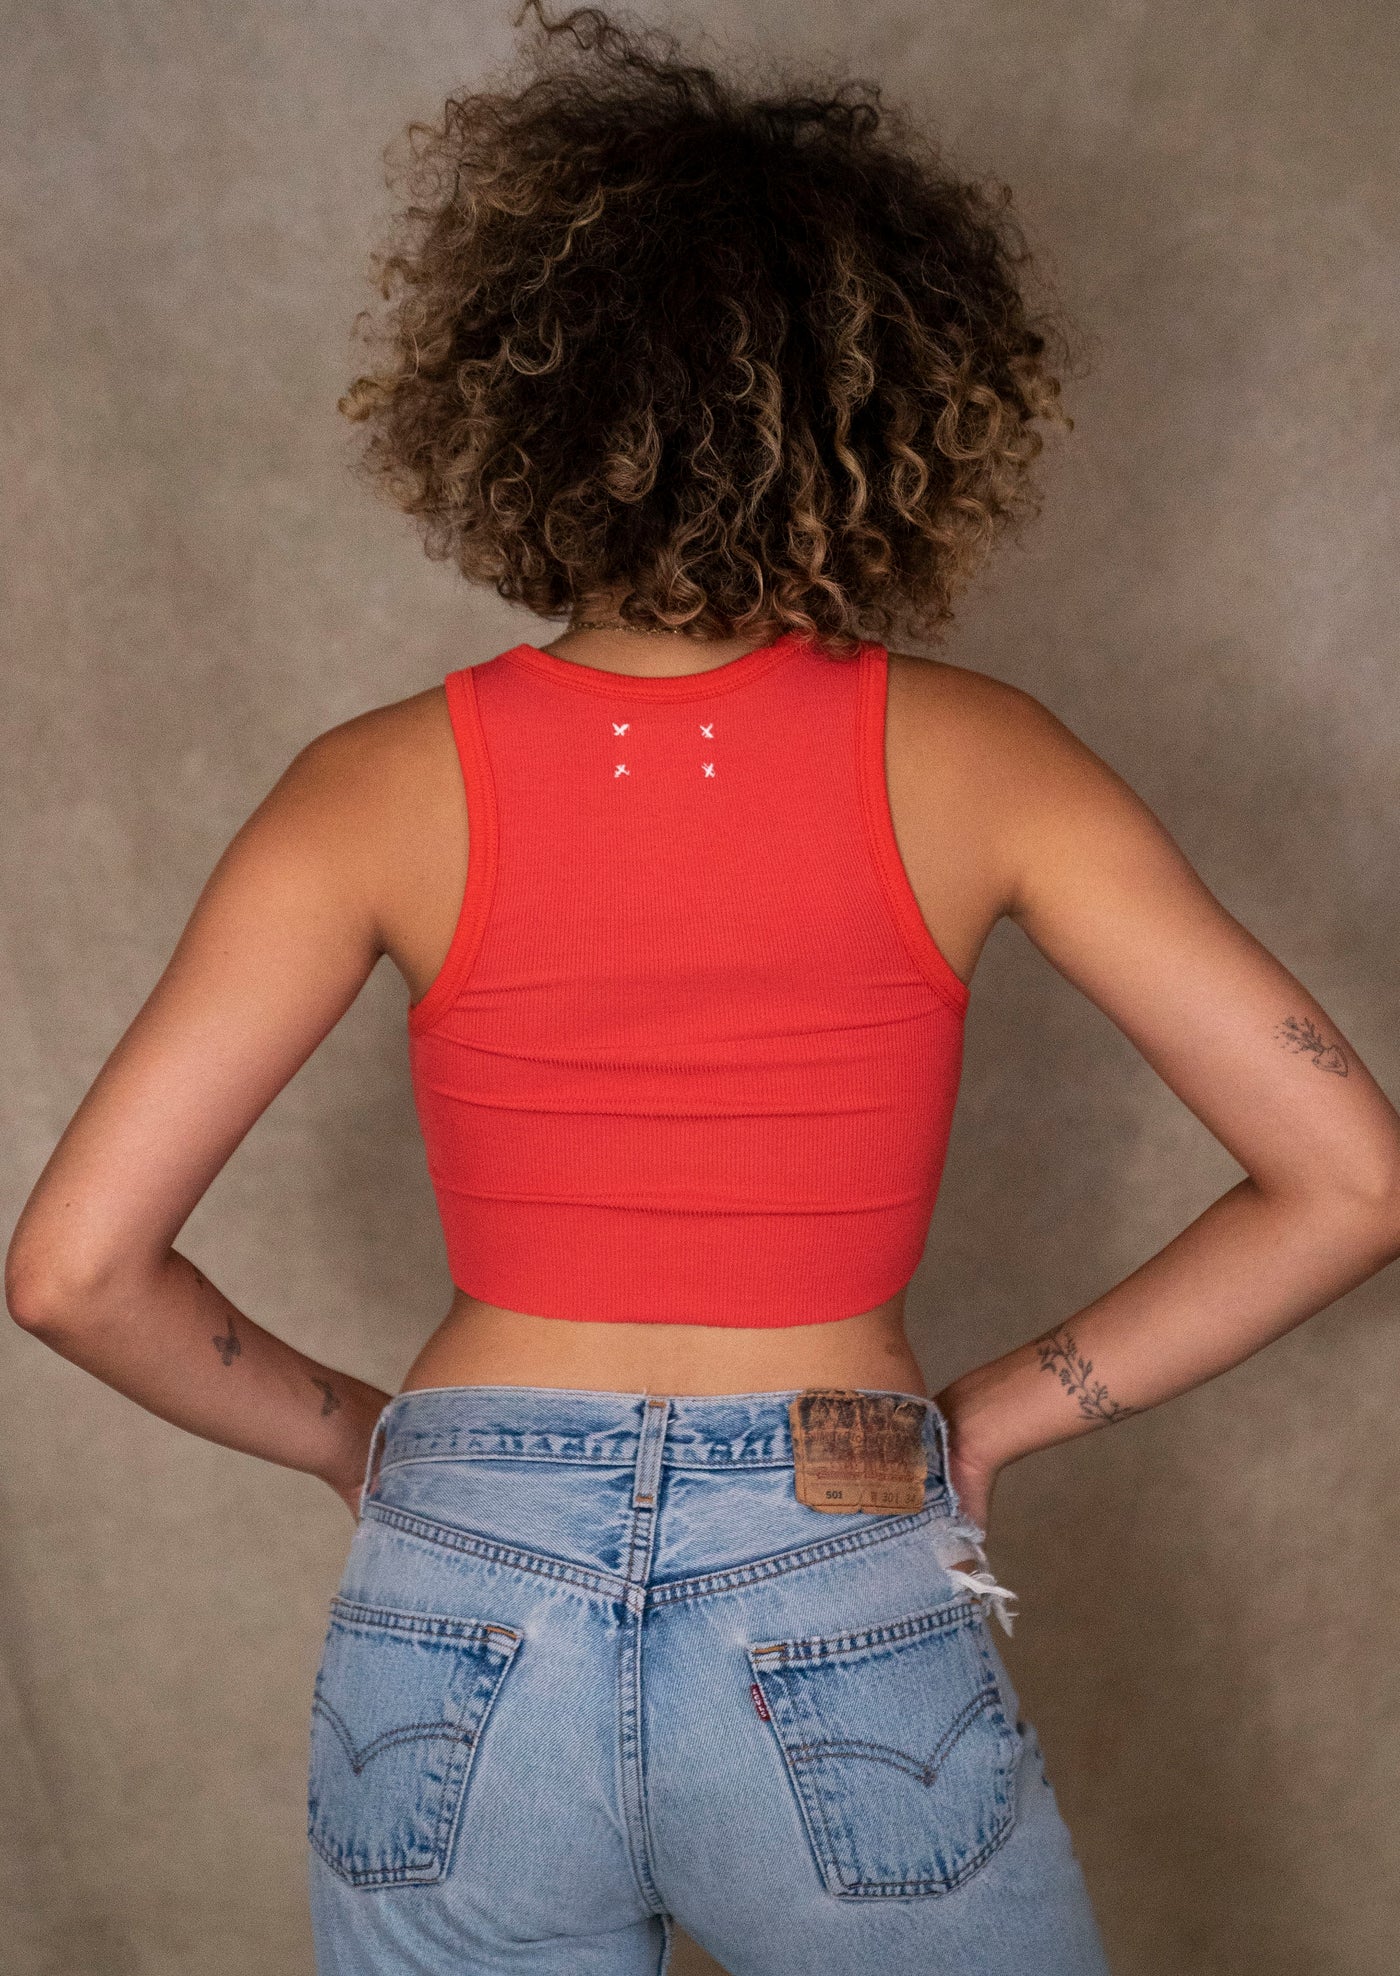 Backside view of the Fire Red Classic Crop Tank on a model, accentuating the tank's chic and snug fit.